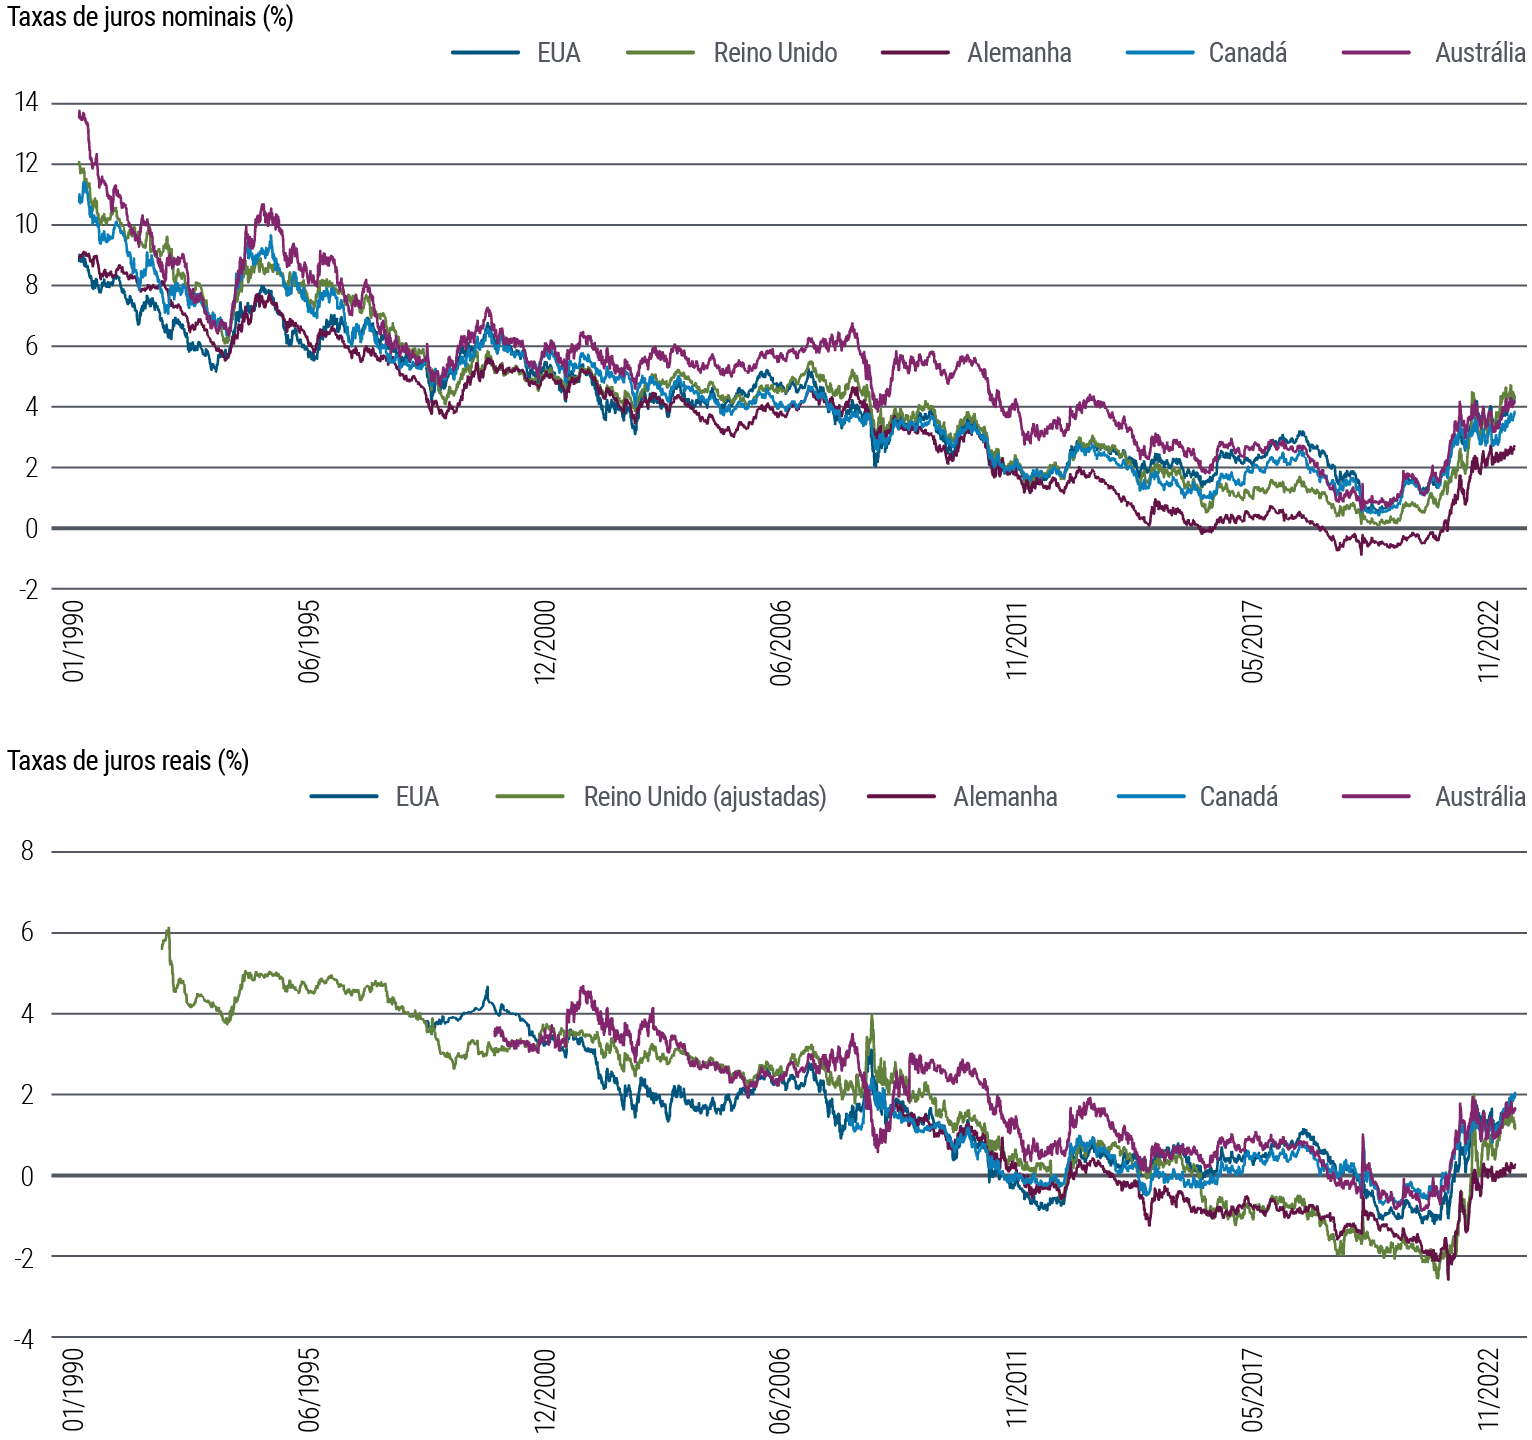 Figure 4 is two line charts. The first chart shows 10-year nominal interest rates in 5 developed market countries (U.S., U.K., Germany, Canada, and Australia) from 1990 through September 2023. In that time frame, nominal yields fluctuated some but along a downward trend from about 9%–14% in 1990 to a low hovering around zero in 2020, around the pandemic. They have since risen into a range from above 2% to above 4%. The second chart shows 10-year real rates for the same countries over the same time frame. Real rates generally and gradually dropped for much of that period, then rose rapidly following the pandemic, slowing those gains more recently but still off their lows and in a range of 0.5%–2.5%. Data source is PIMCO and Bloomberg as of 2 October 2023. 